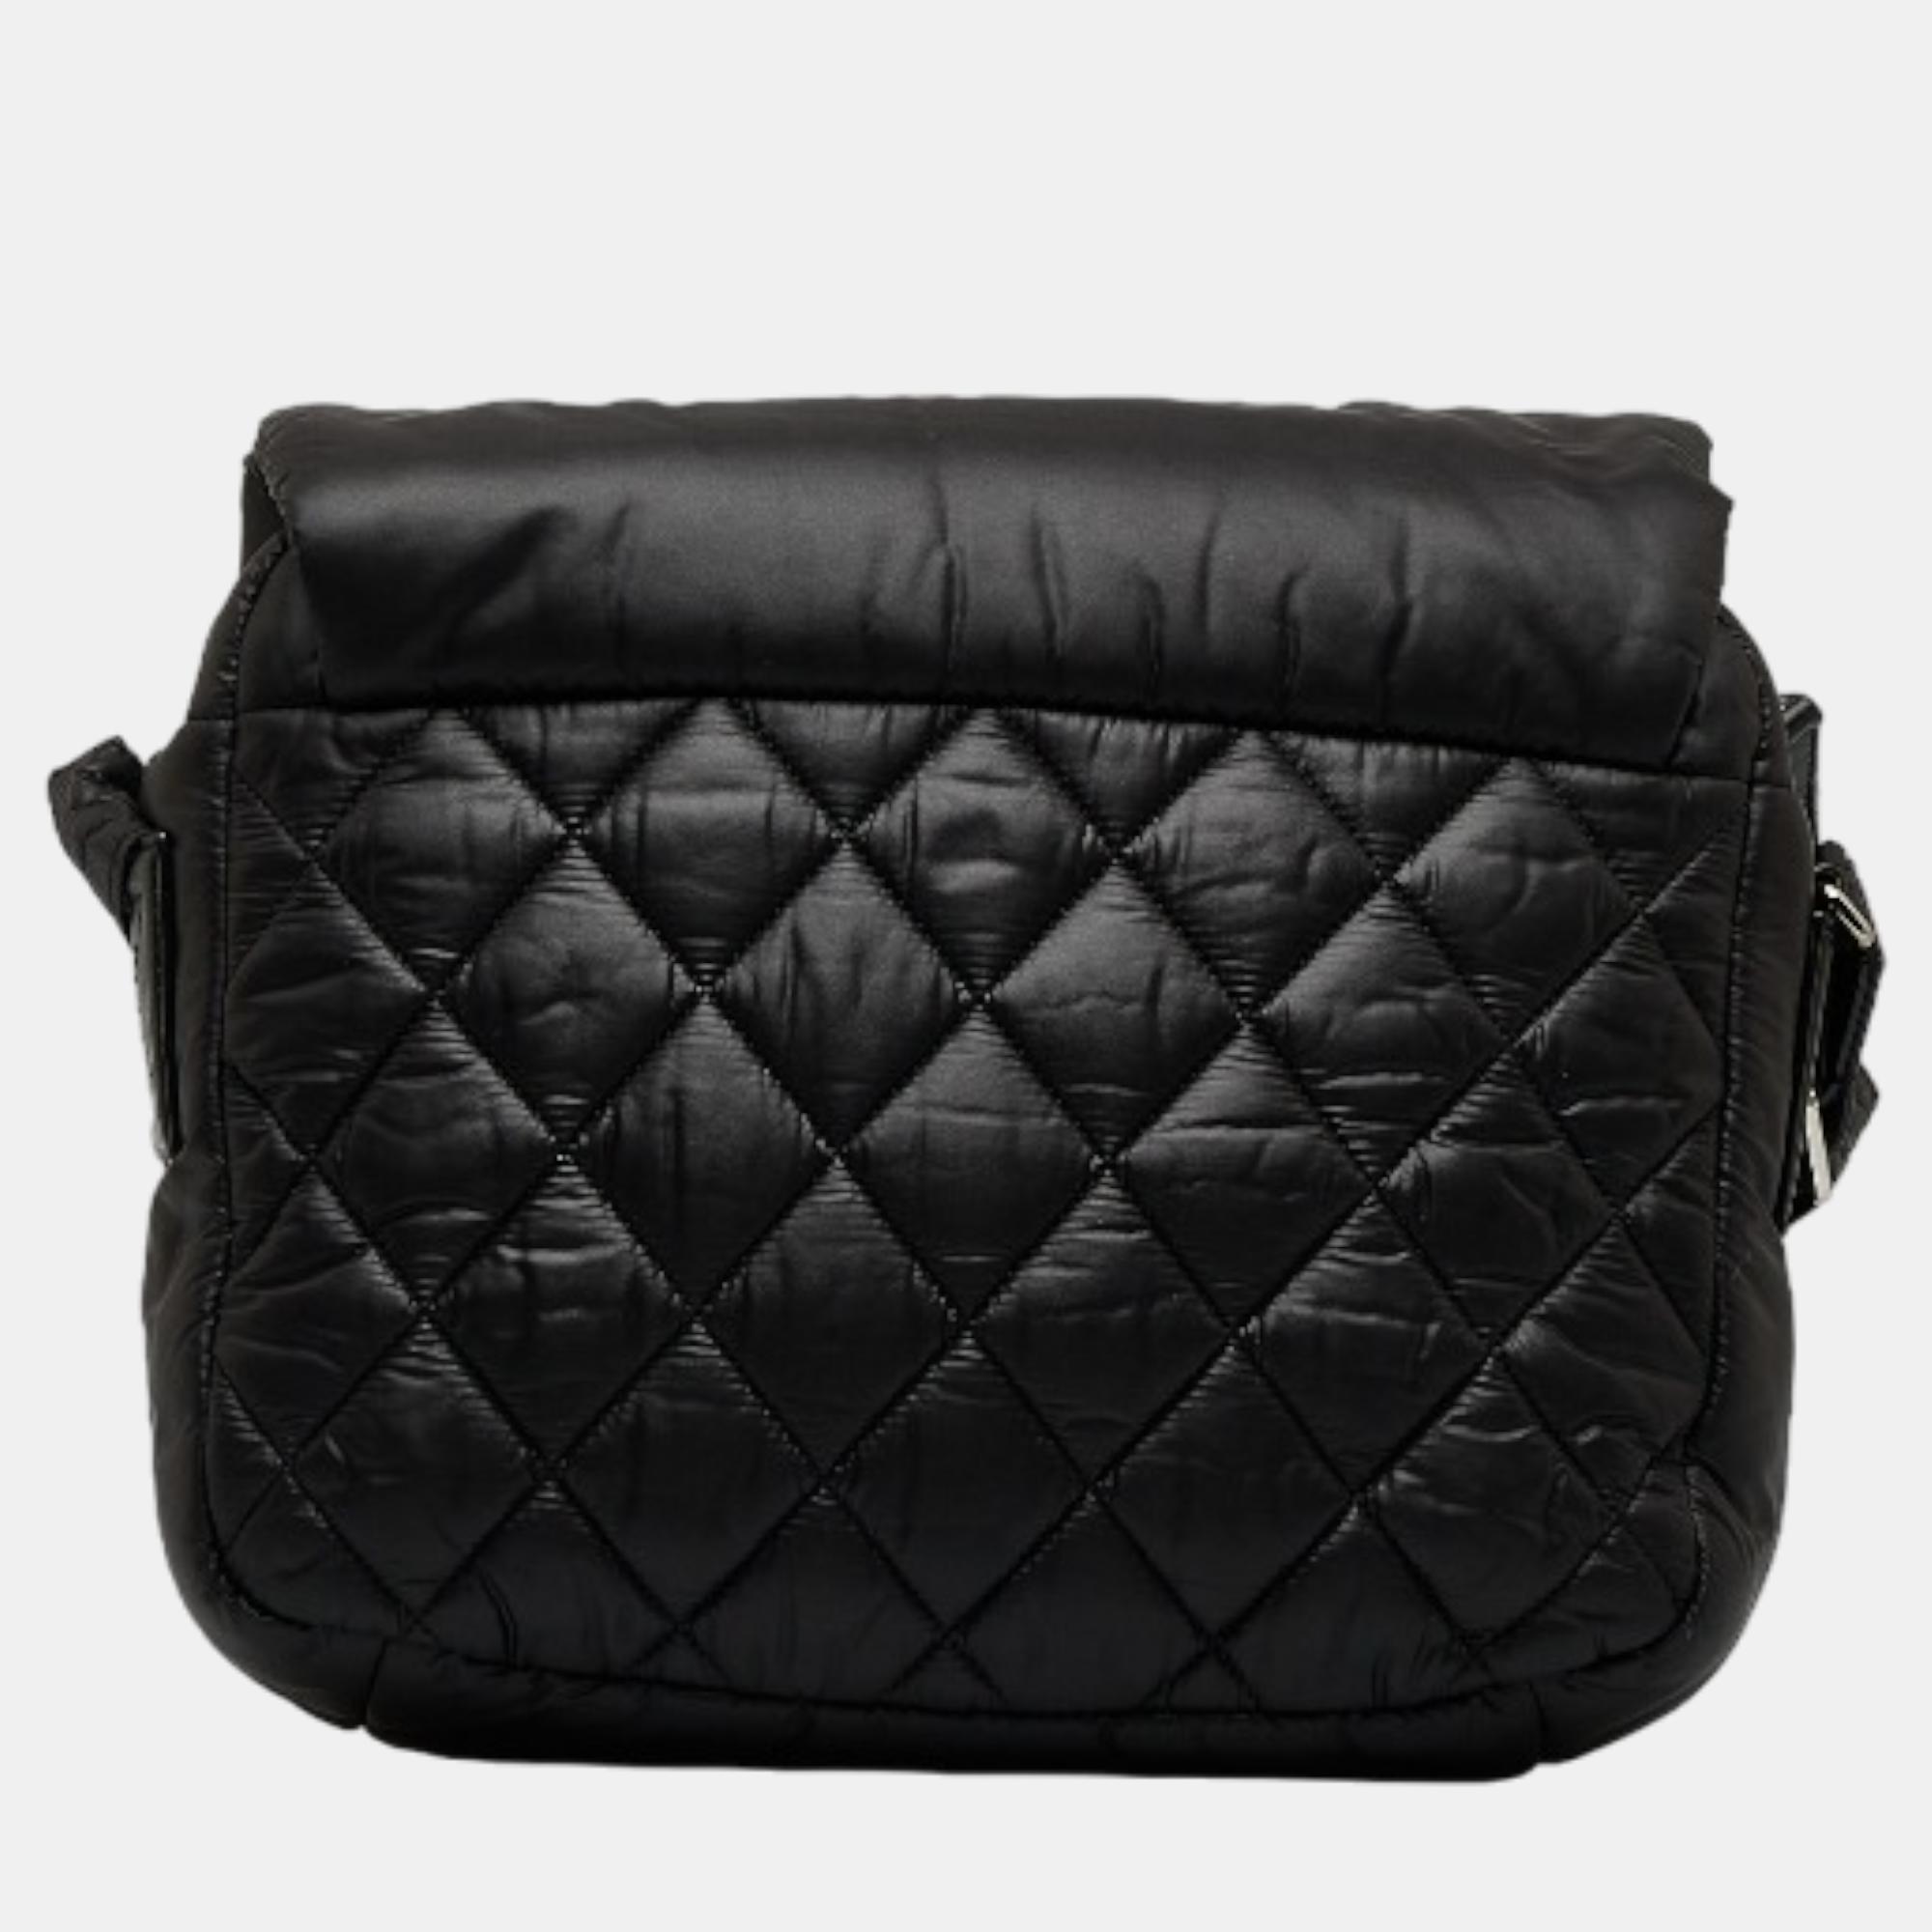 Chanel Black Canvas Cocoon Quilted Messenger Bag